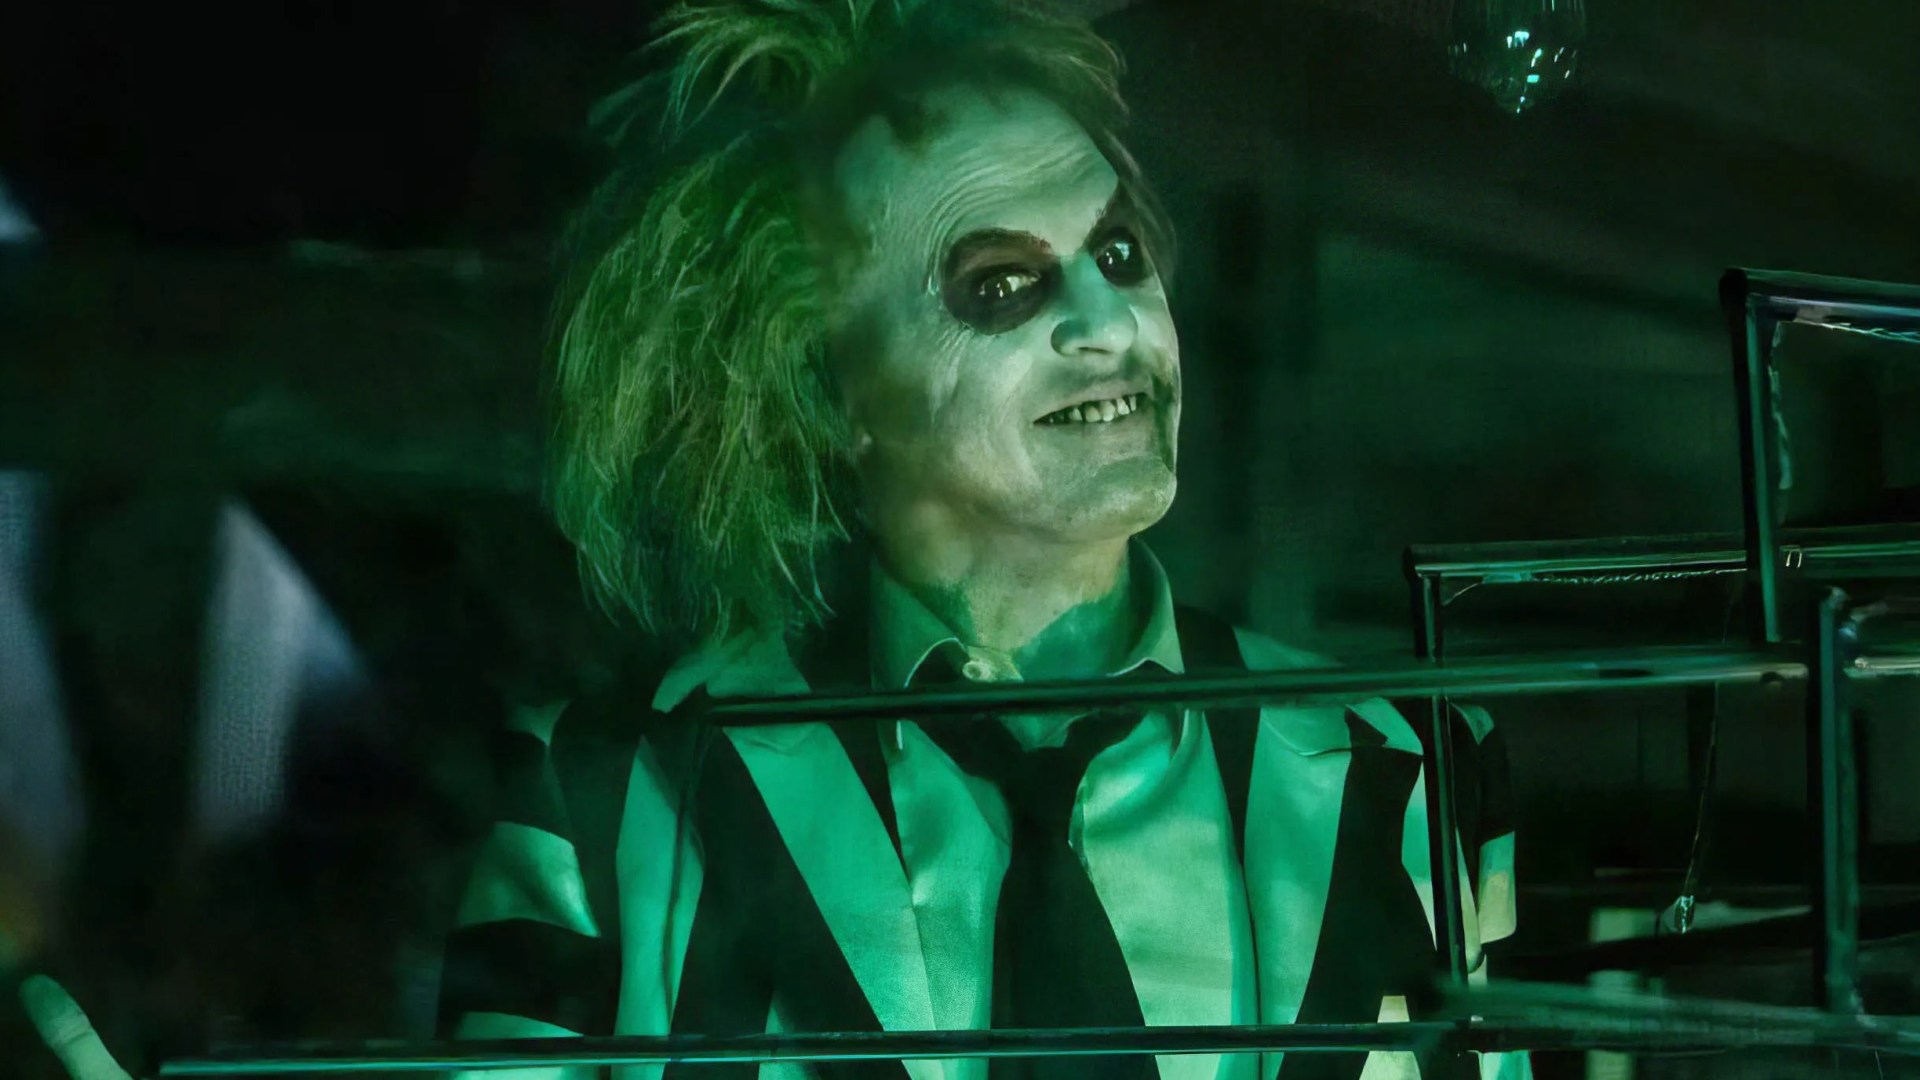 Beetlejuice Sequel: A Spooky Reunion with Michael Keaton and Winona Ryder after 36 Years!